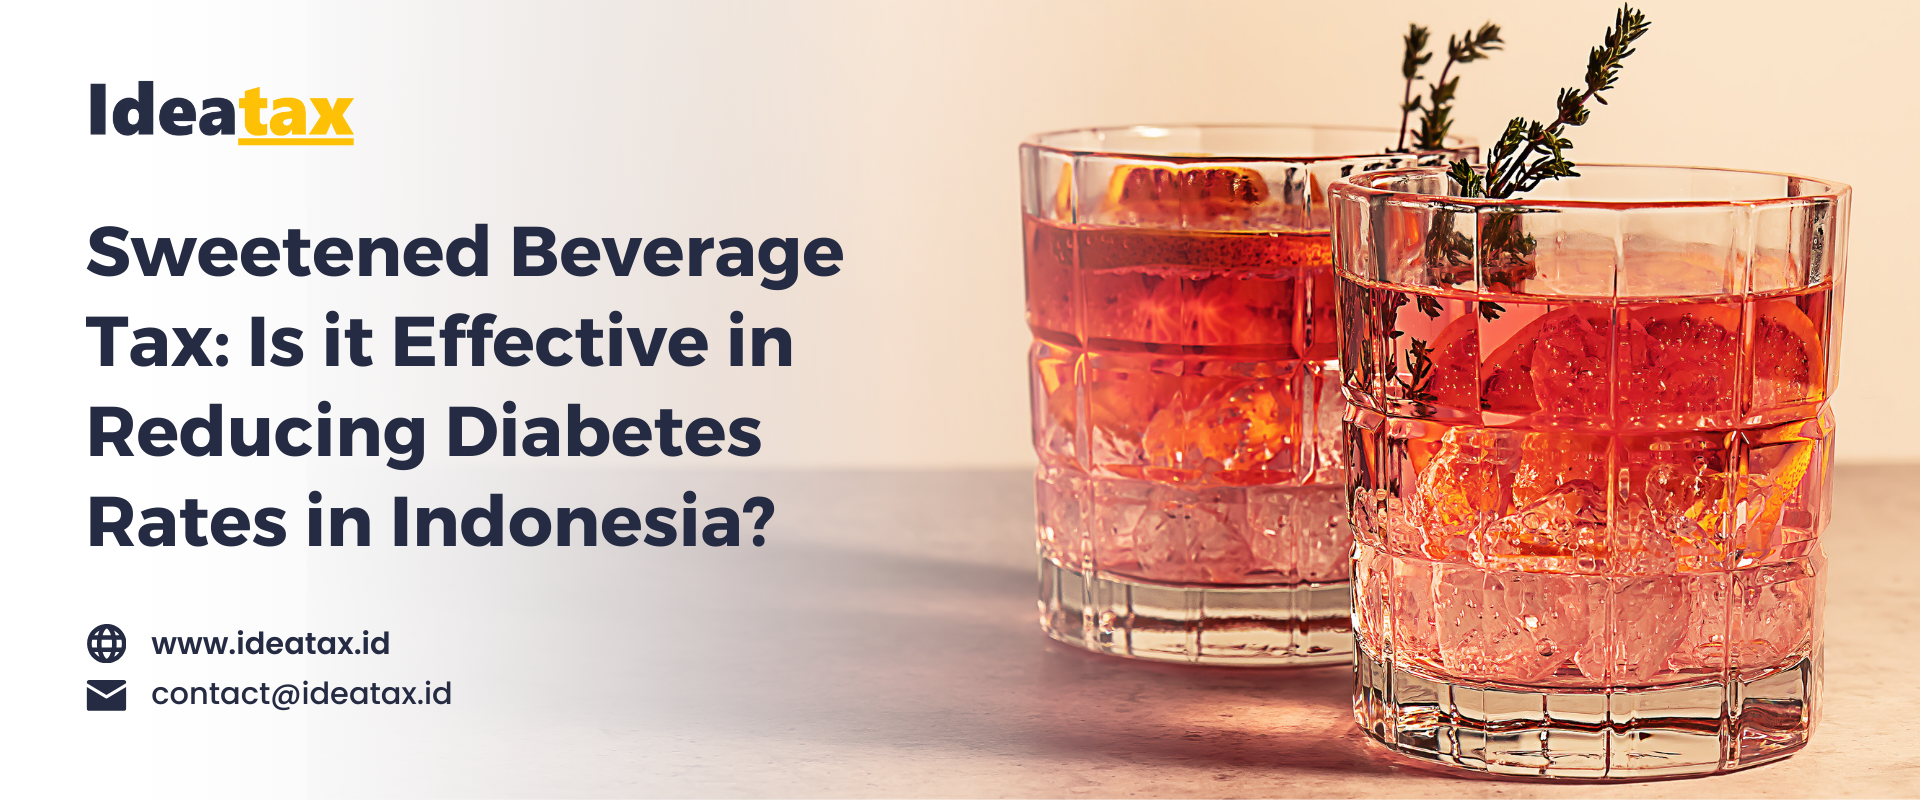 Sweetened Beverage Tax: Is it Effective in Reducing Diabetes Rates in Indonesia?